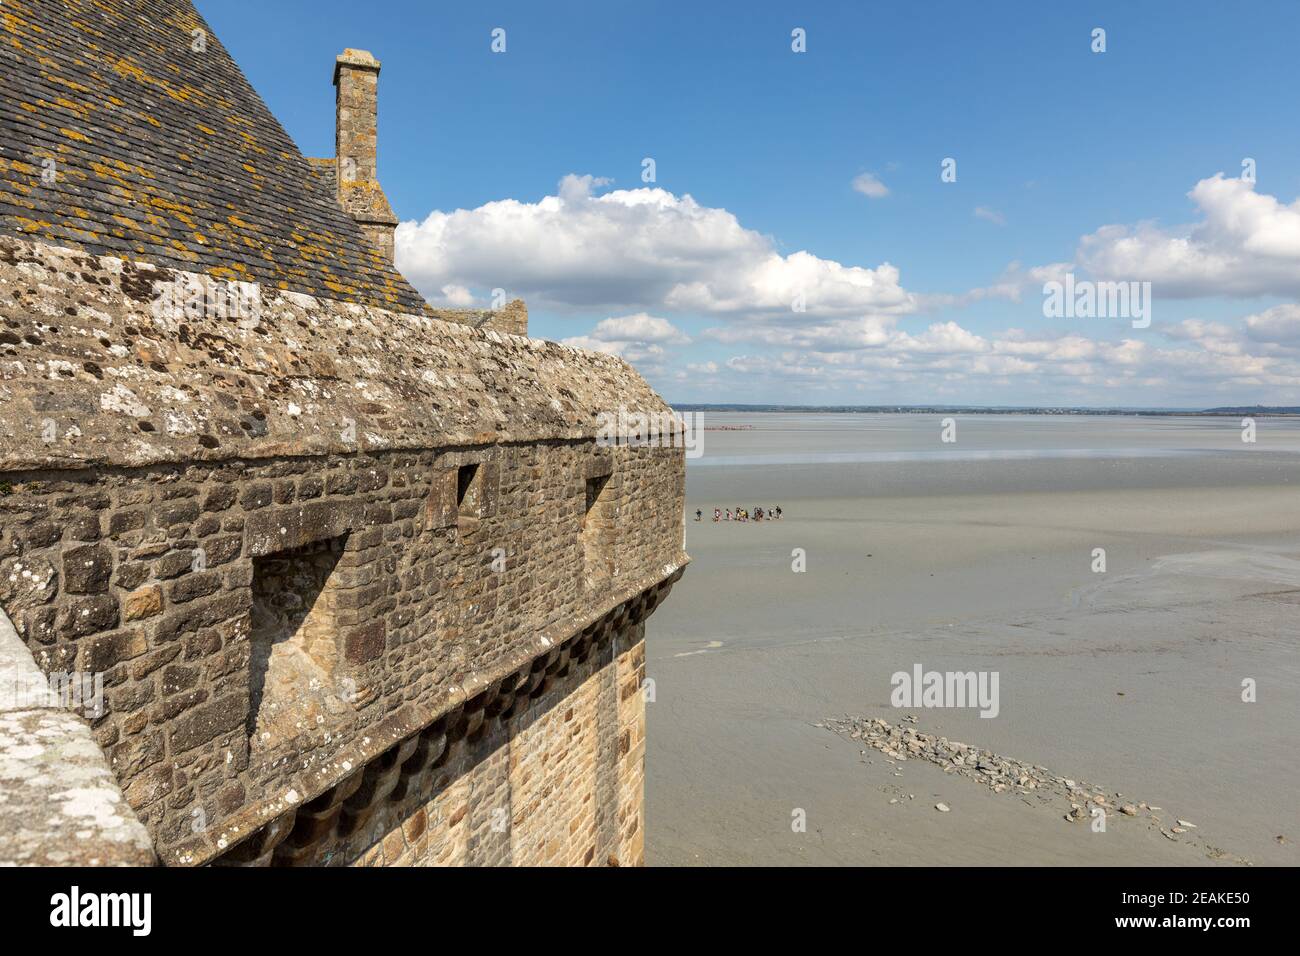 Mont Saint-Michel, the monastery and village on a tidal island between Brittany and Normandy, France Stock Photo